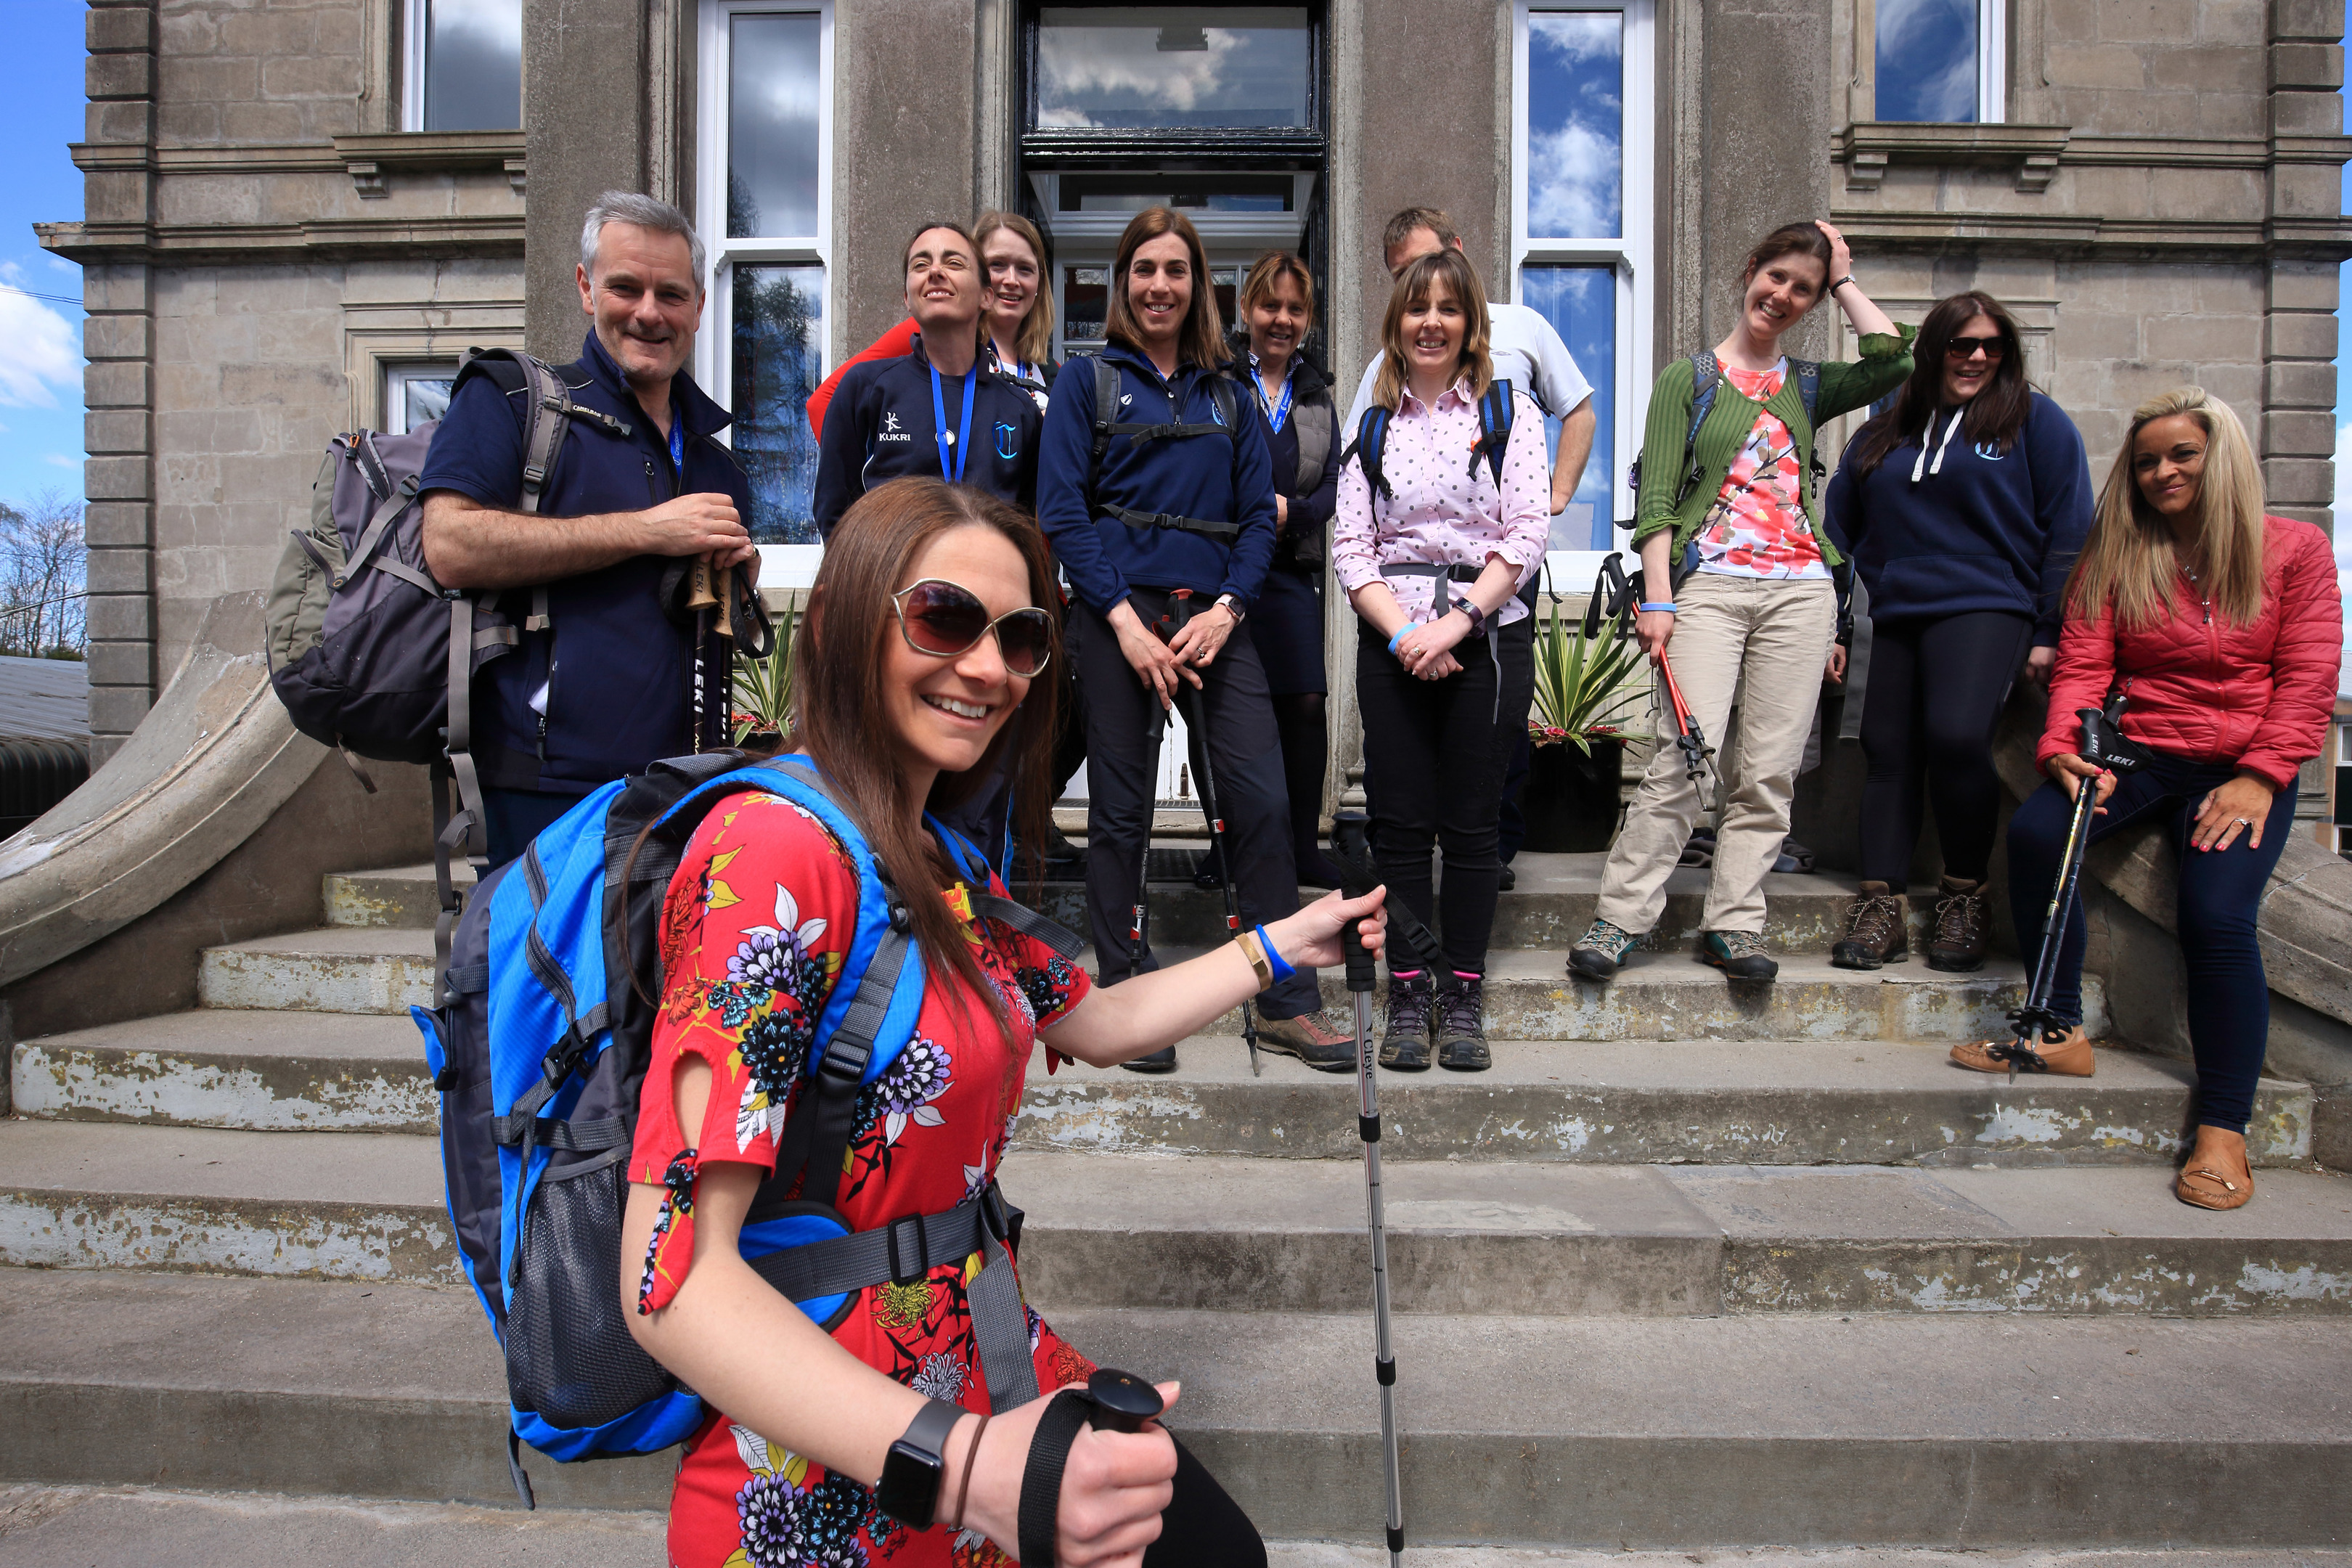 A group of teachers at Craigclowan Prep School in Perth are taking part in the Cateran Yomp. Mel Hill is at the front.